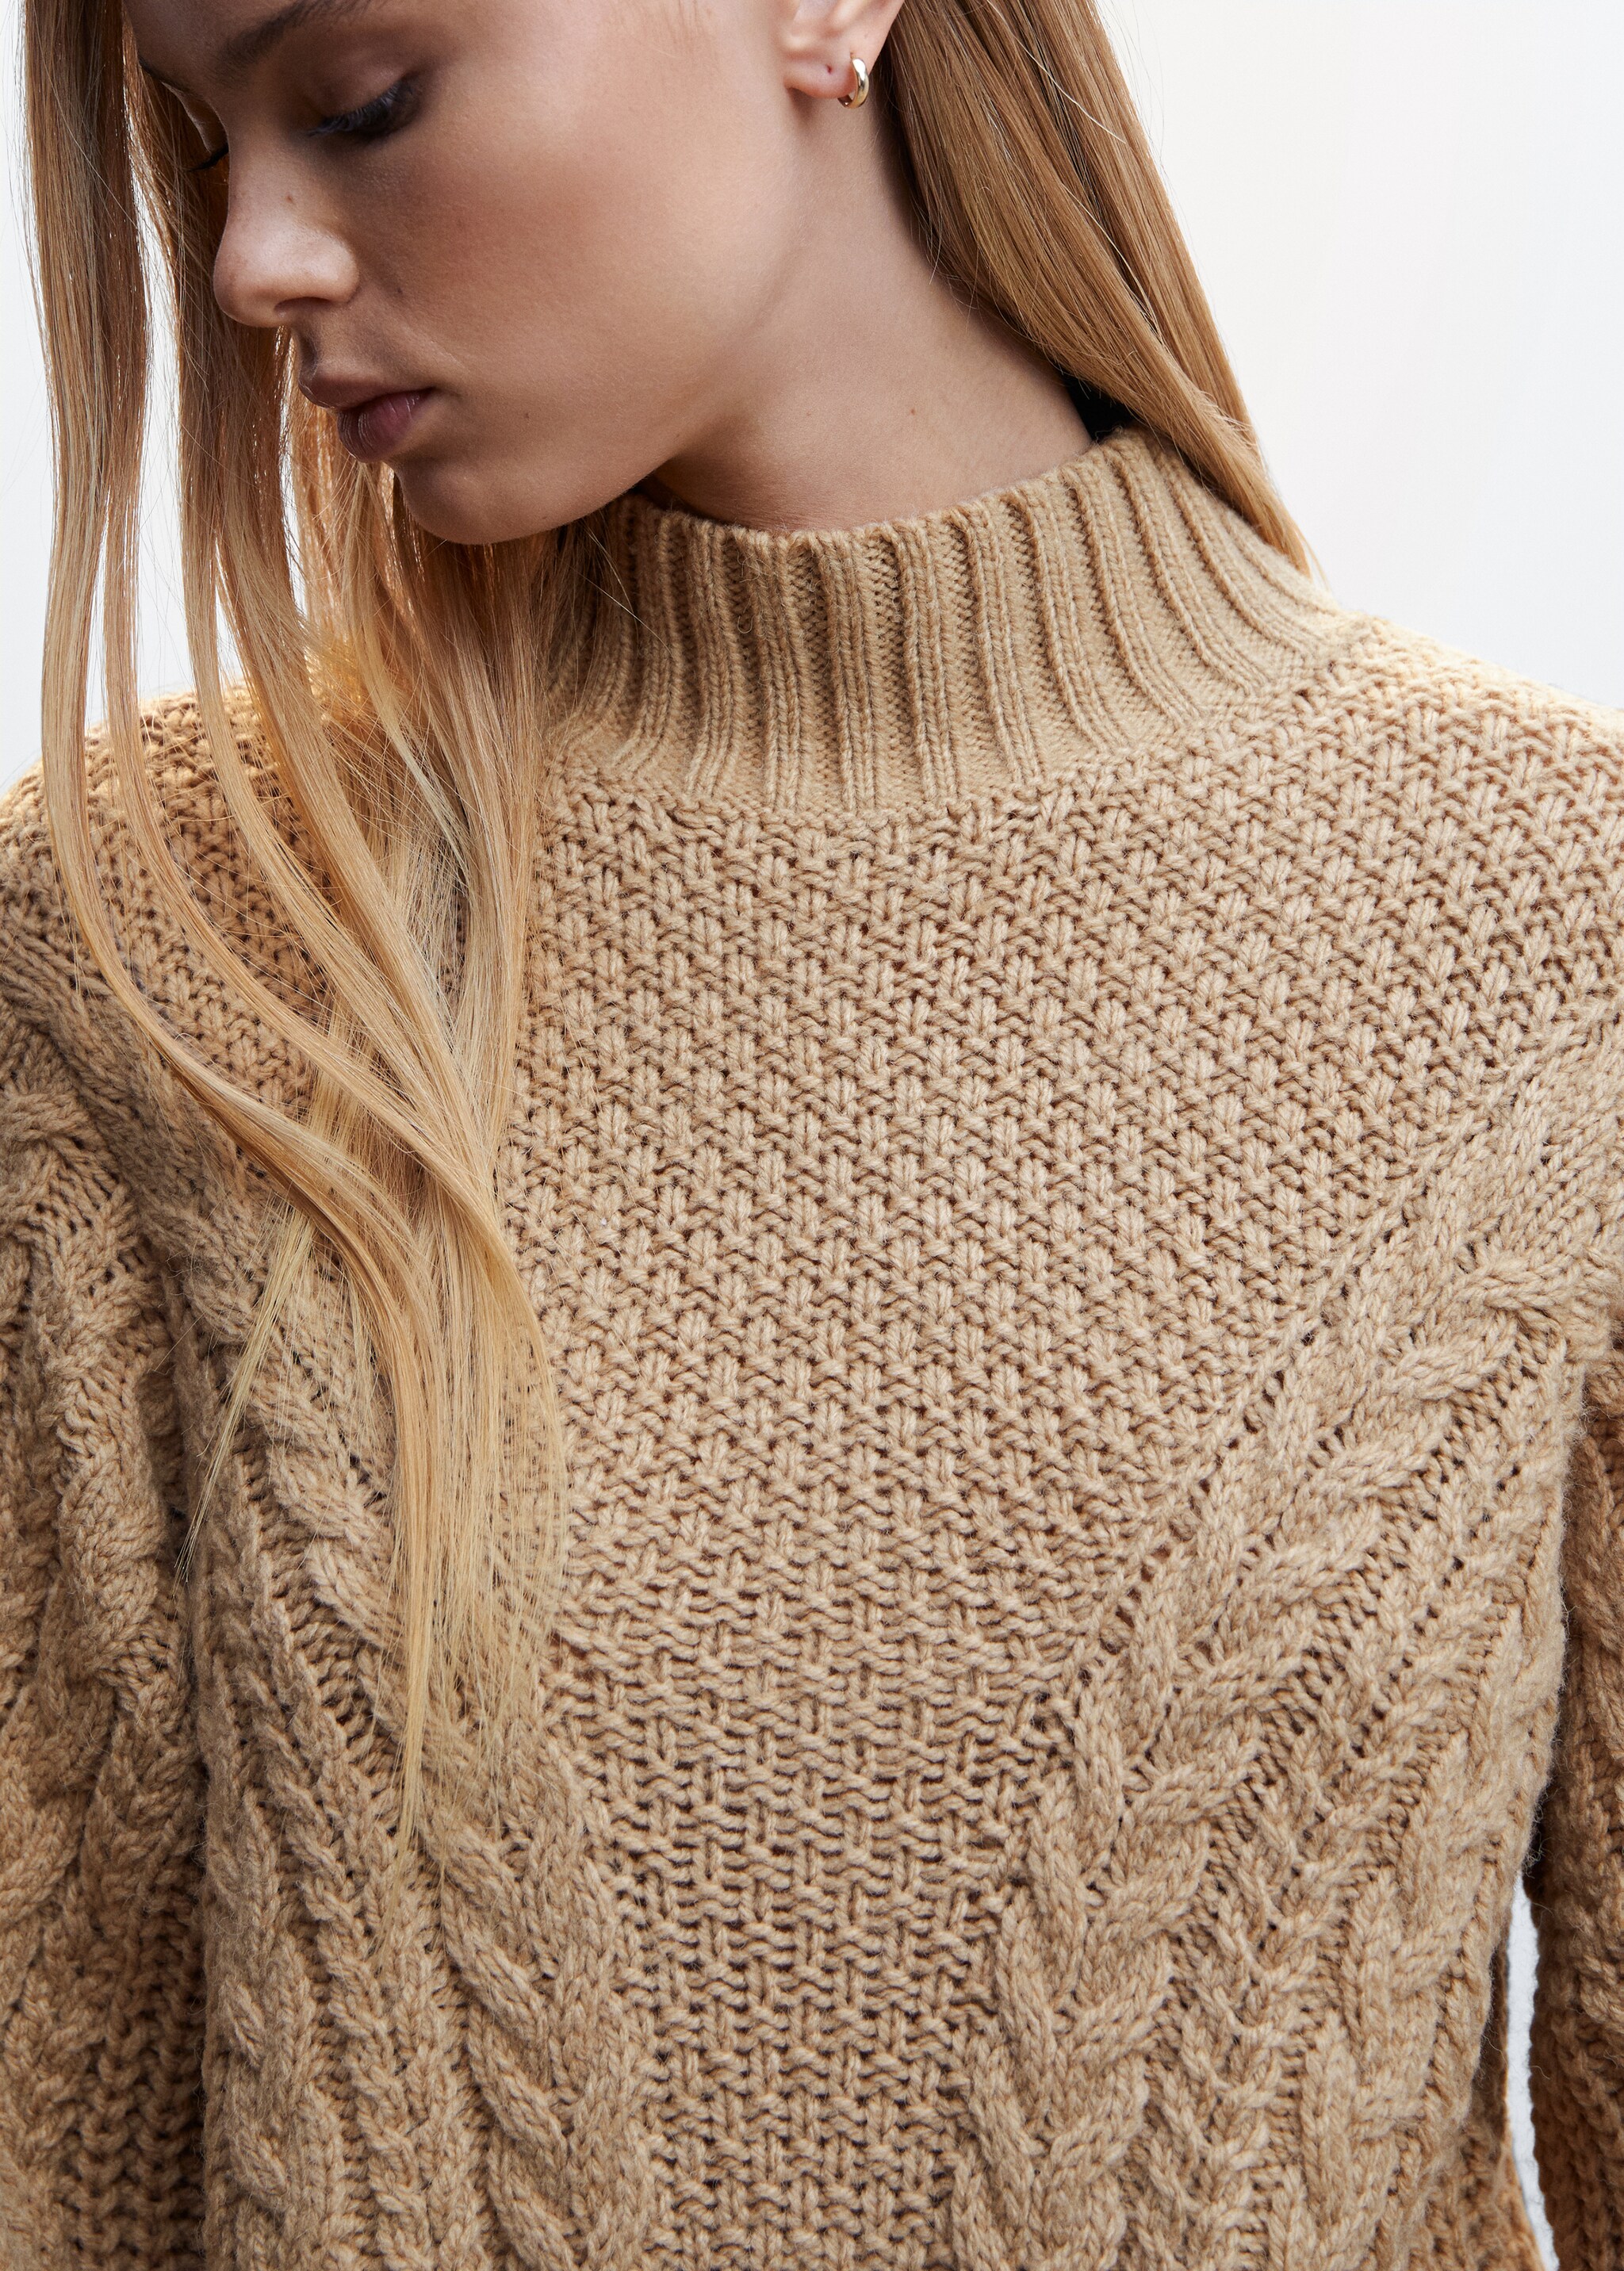 Knitted Perkins neck dress - Details of the article 6